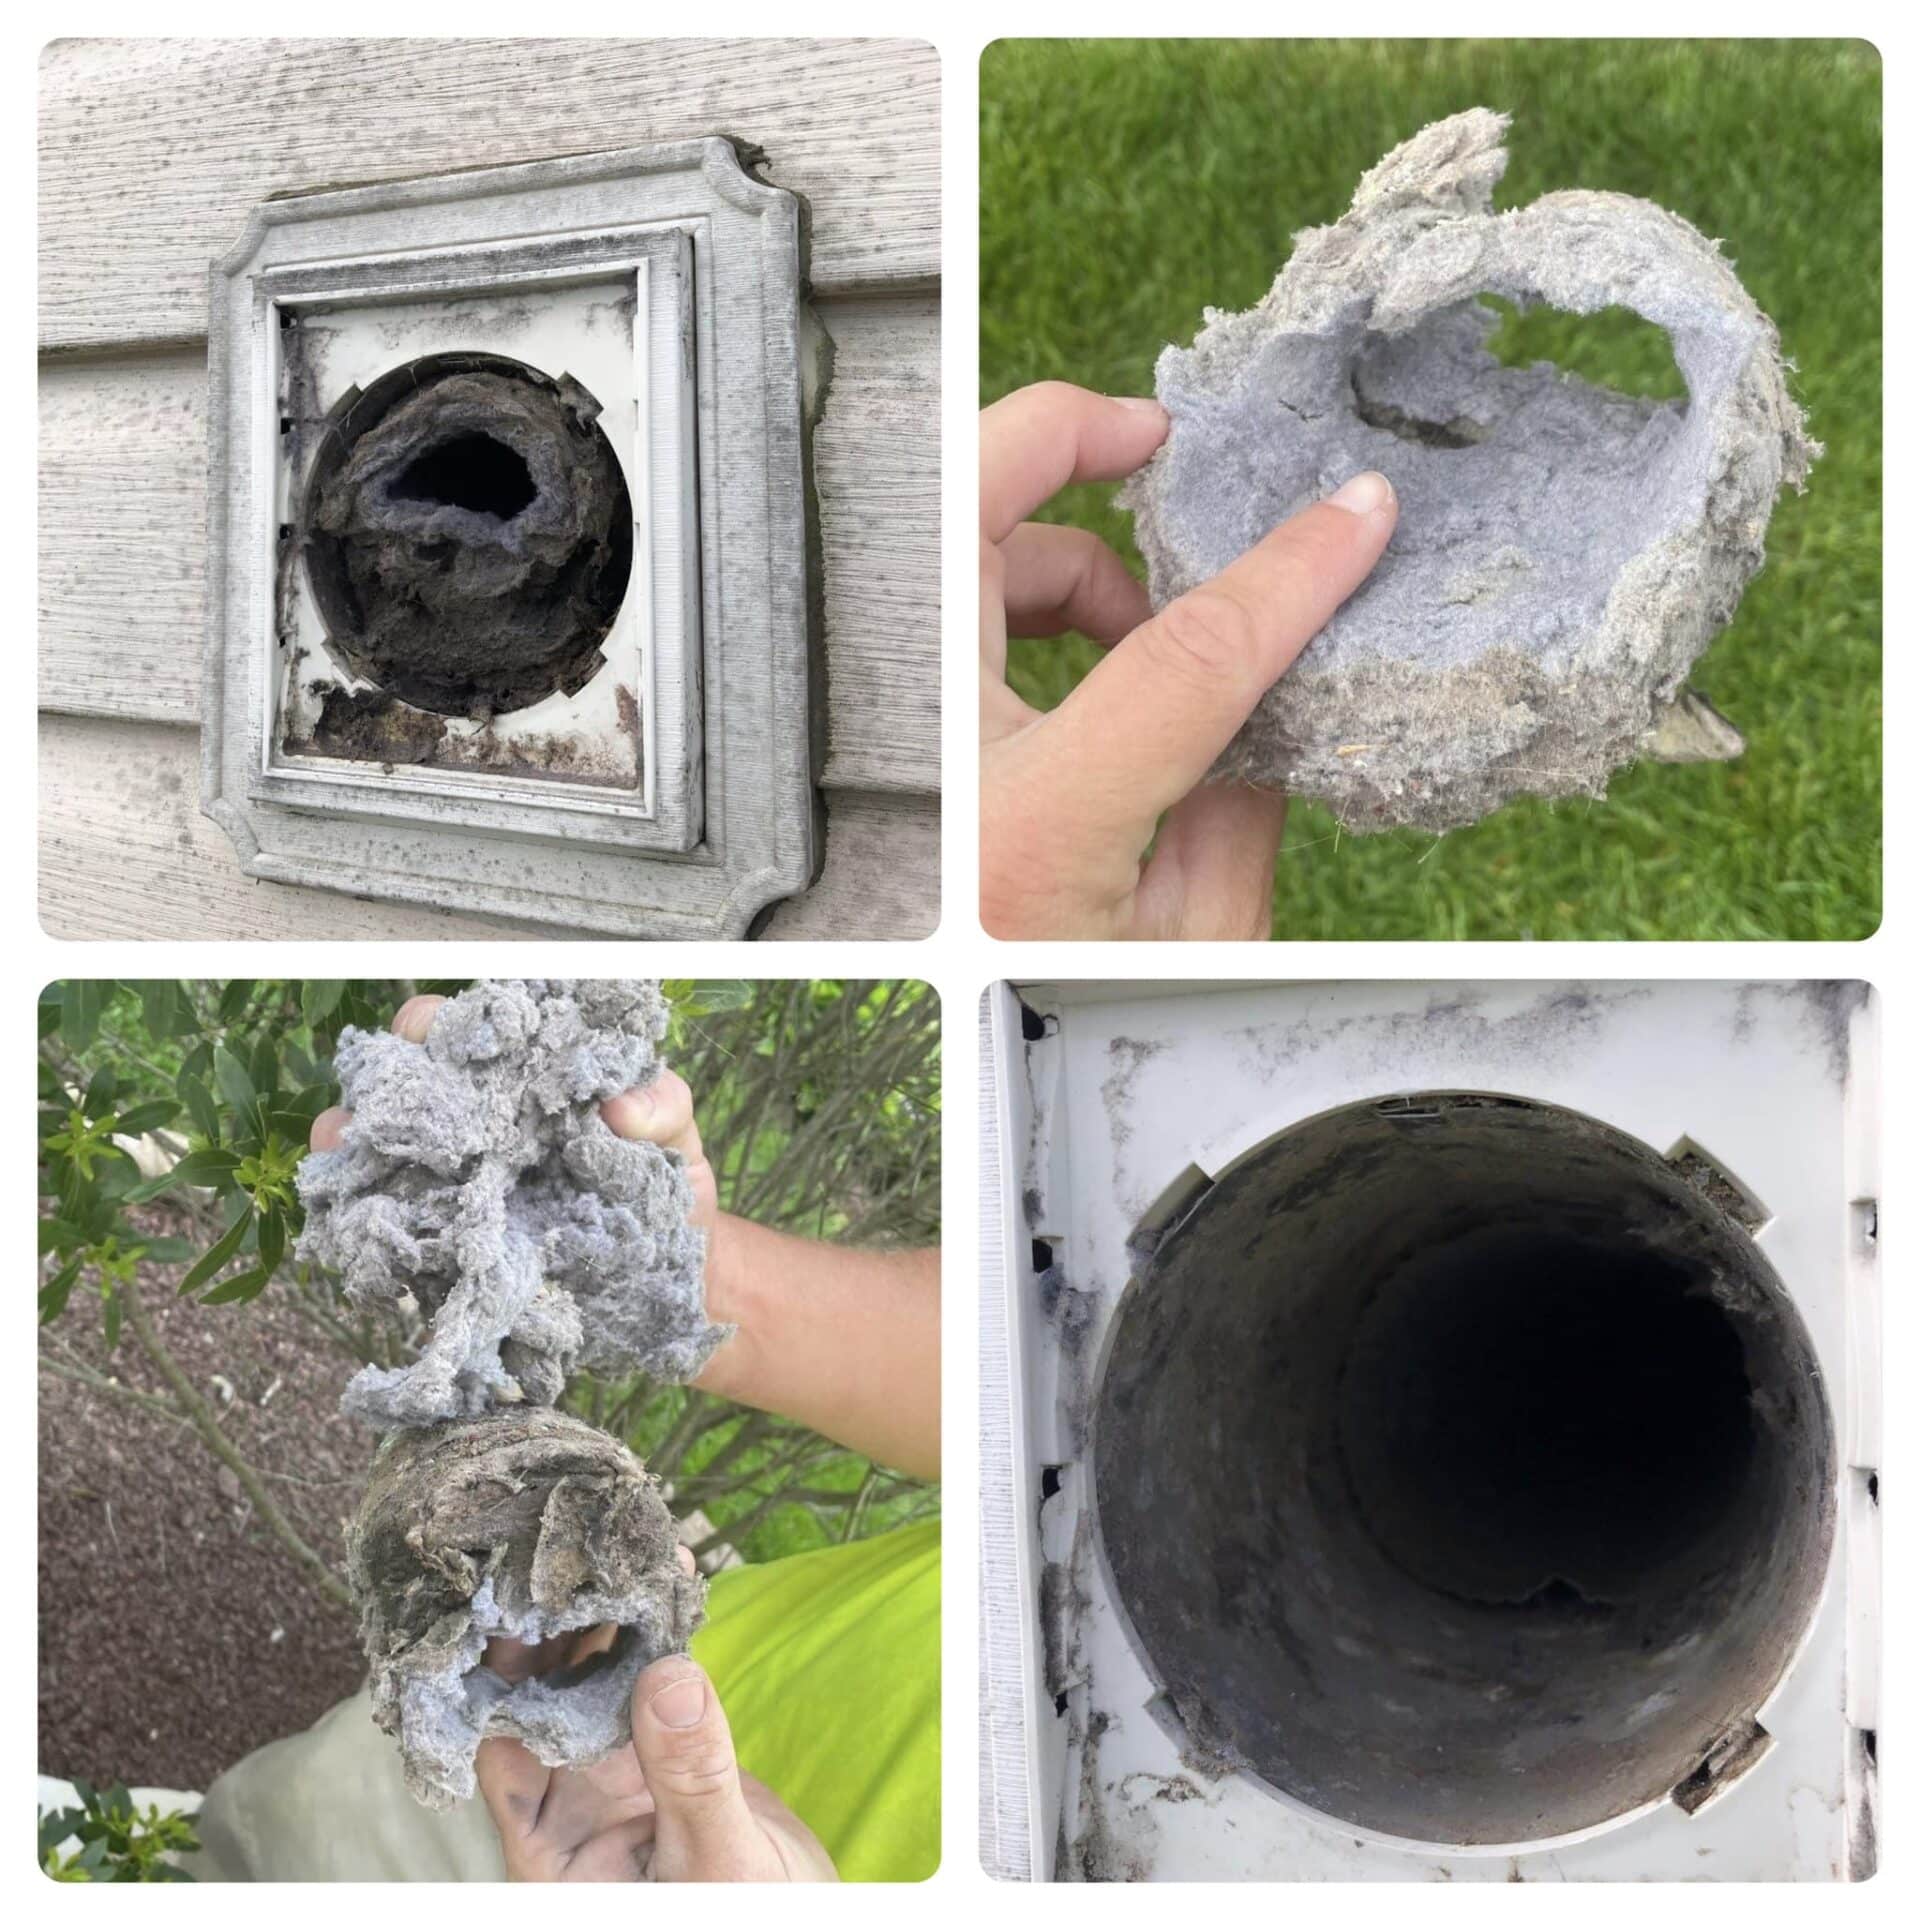 applied power wash Dryer Vent cleaning